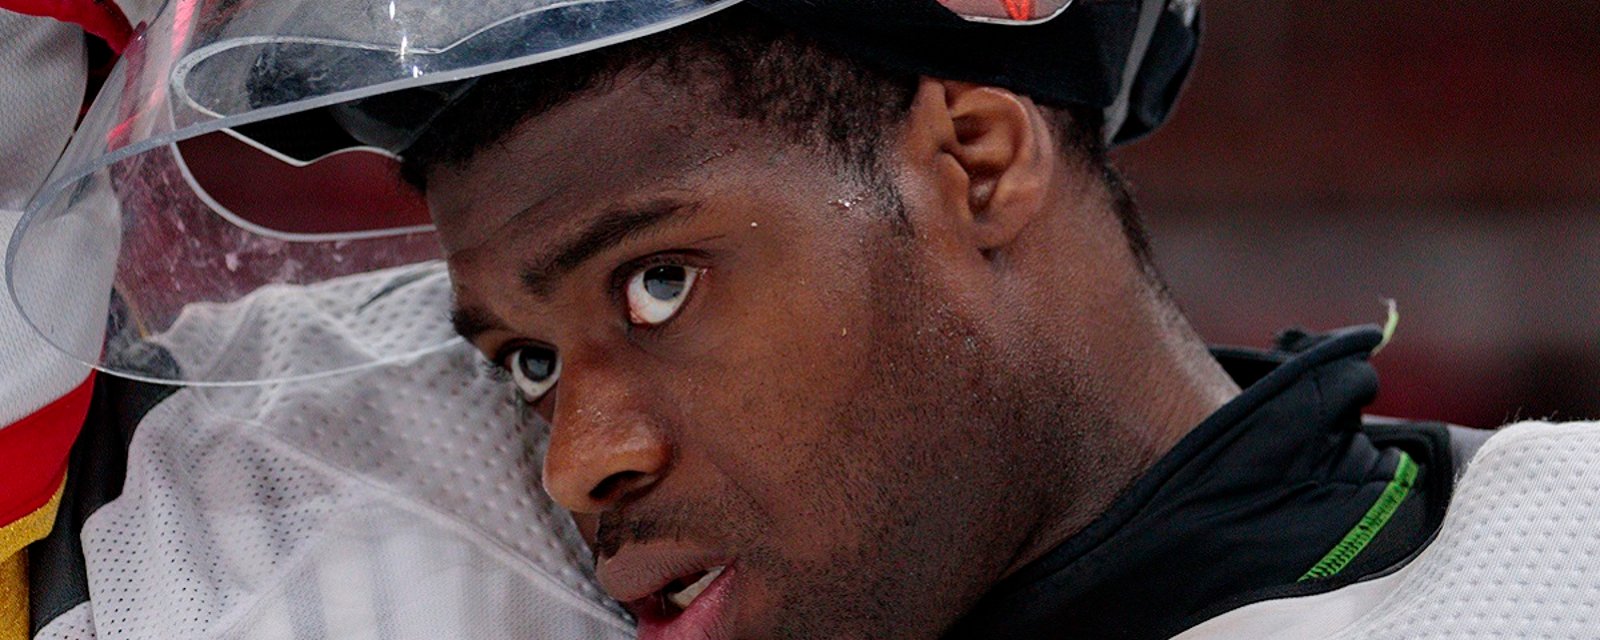 Malcolm Subban makes another massive blunder in Boston.